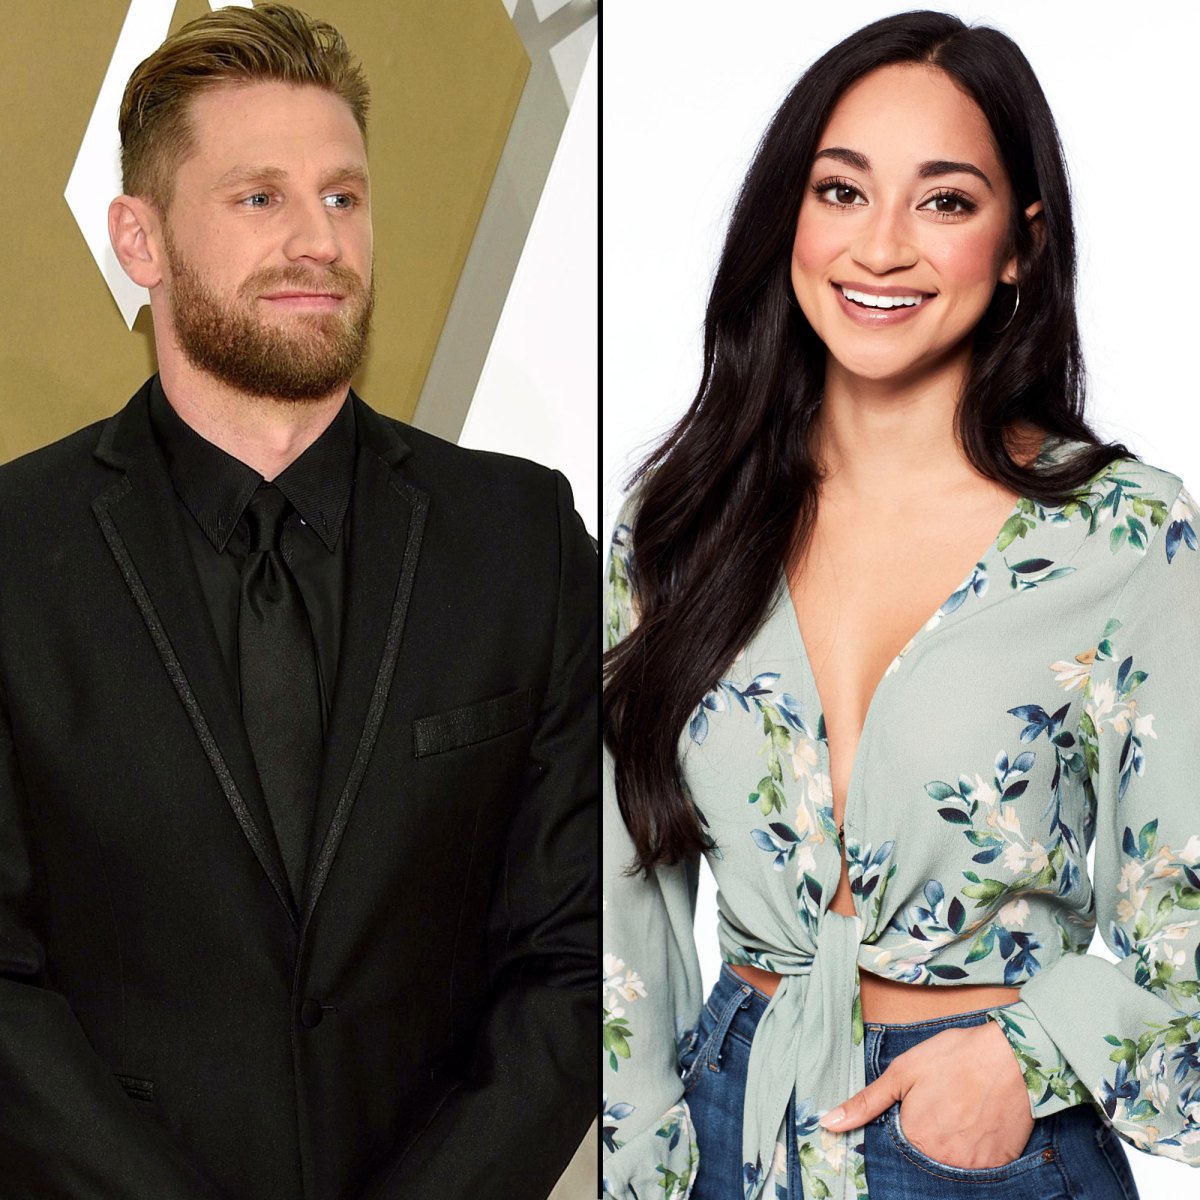 Bachelor’s Victoria F. Dated Country Singer Chase Rice What We Know